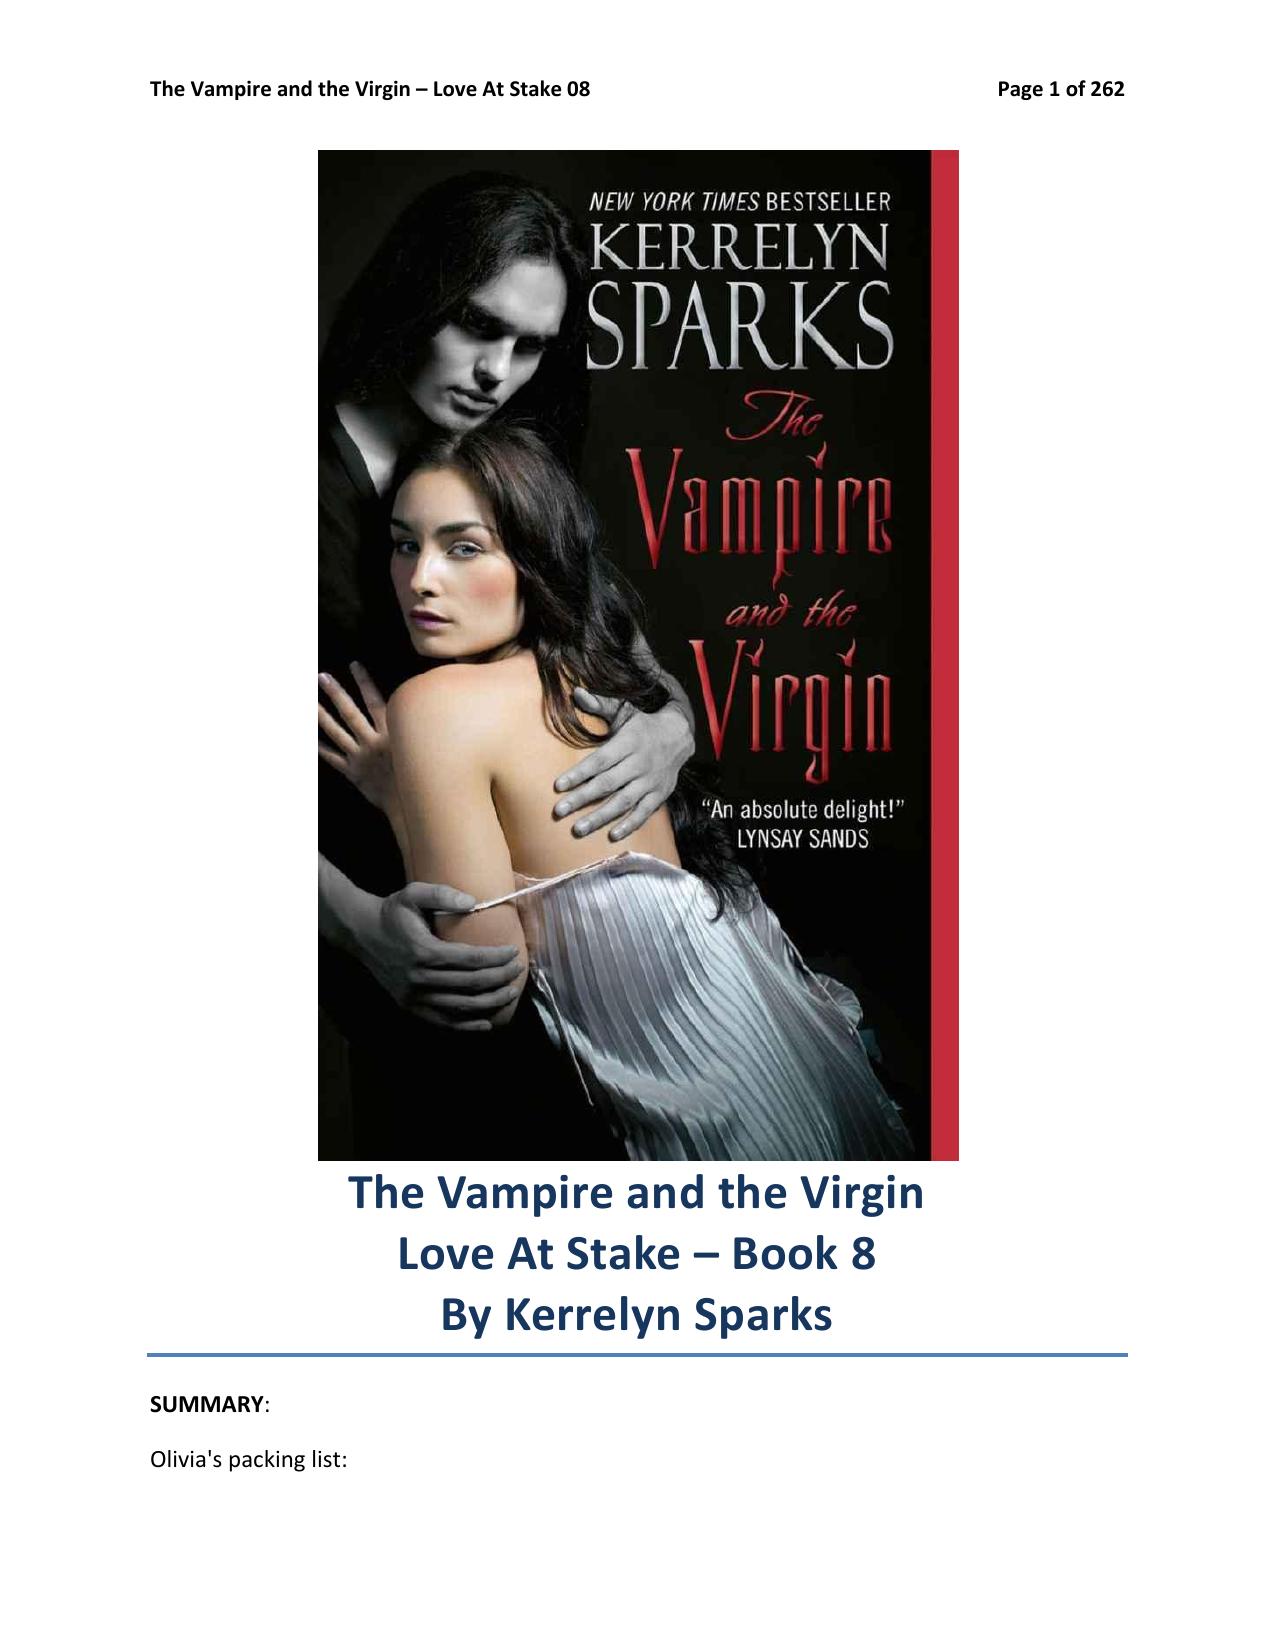 The Vampire and the Virgin by Kerrelyn Sparks